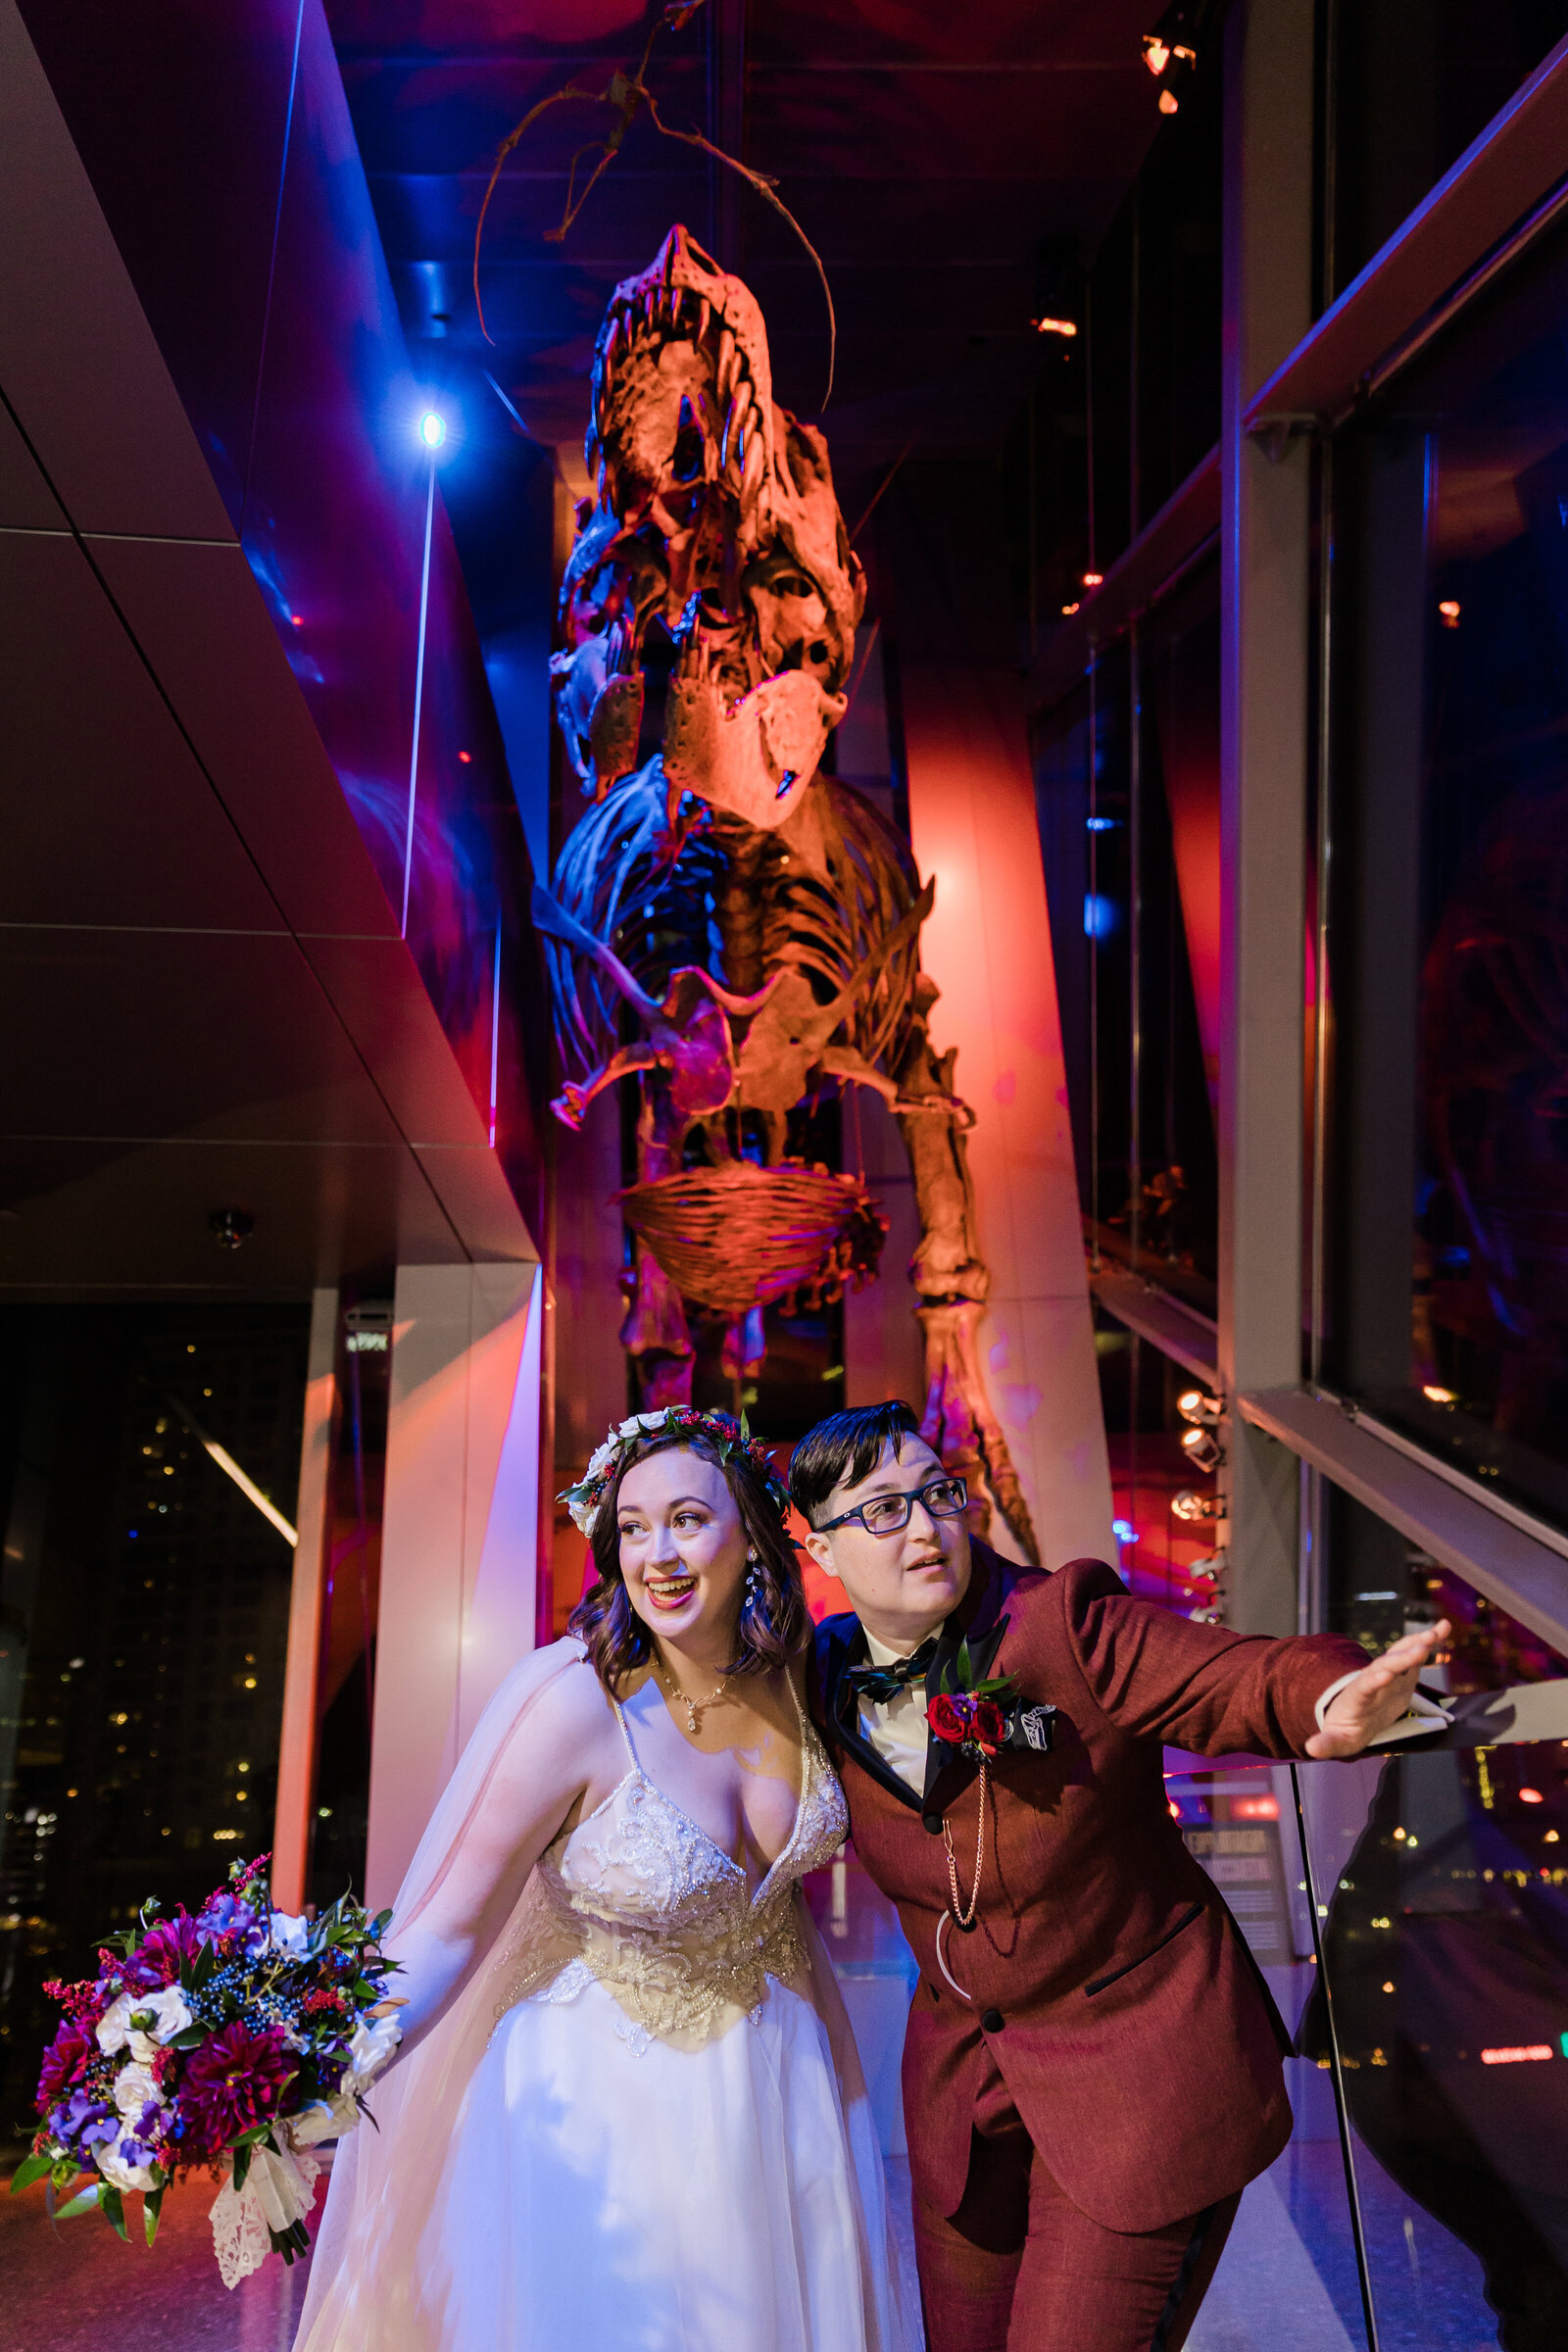 Two brides posing excitedly with a tyrannosaur rex skeleton at the Perot Museum in Dallas, Texas. The skeleton is bathed in colorful light. The bride on the left is wearing a detailed white dress, long flowing view, and is holding a bouquet. The bride on the right is wearing a burgundy suit and boutonniere.